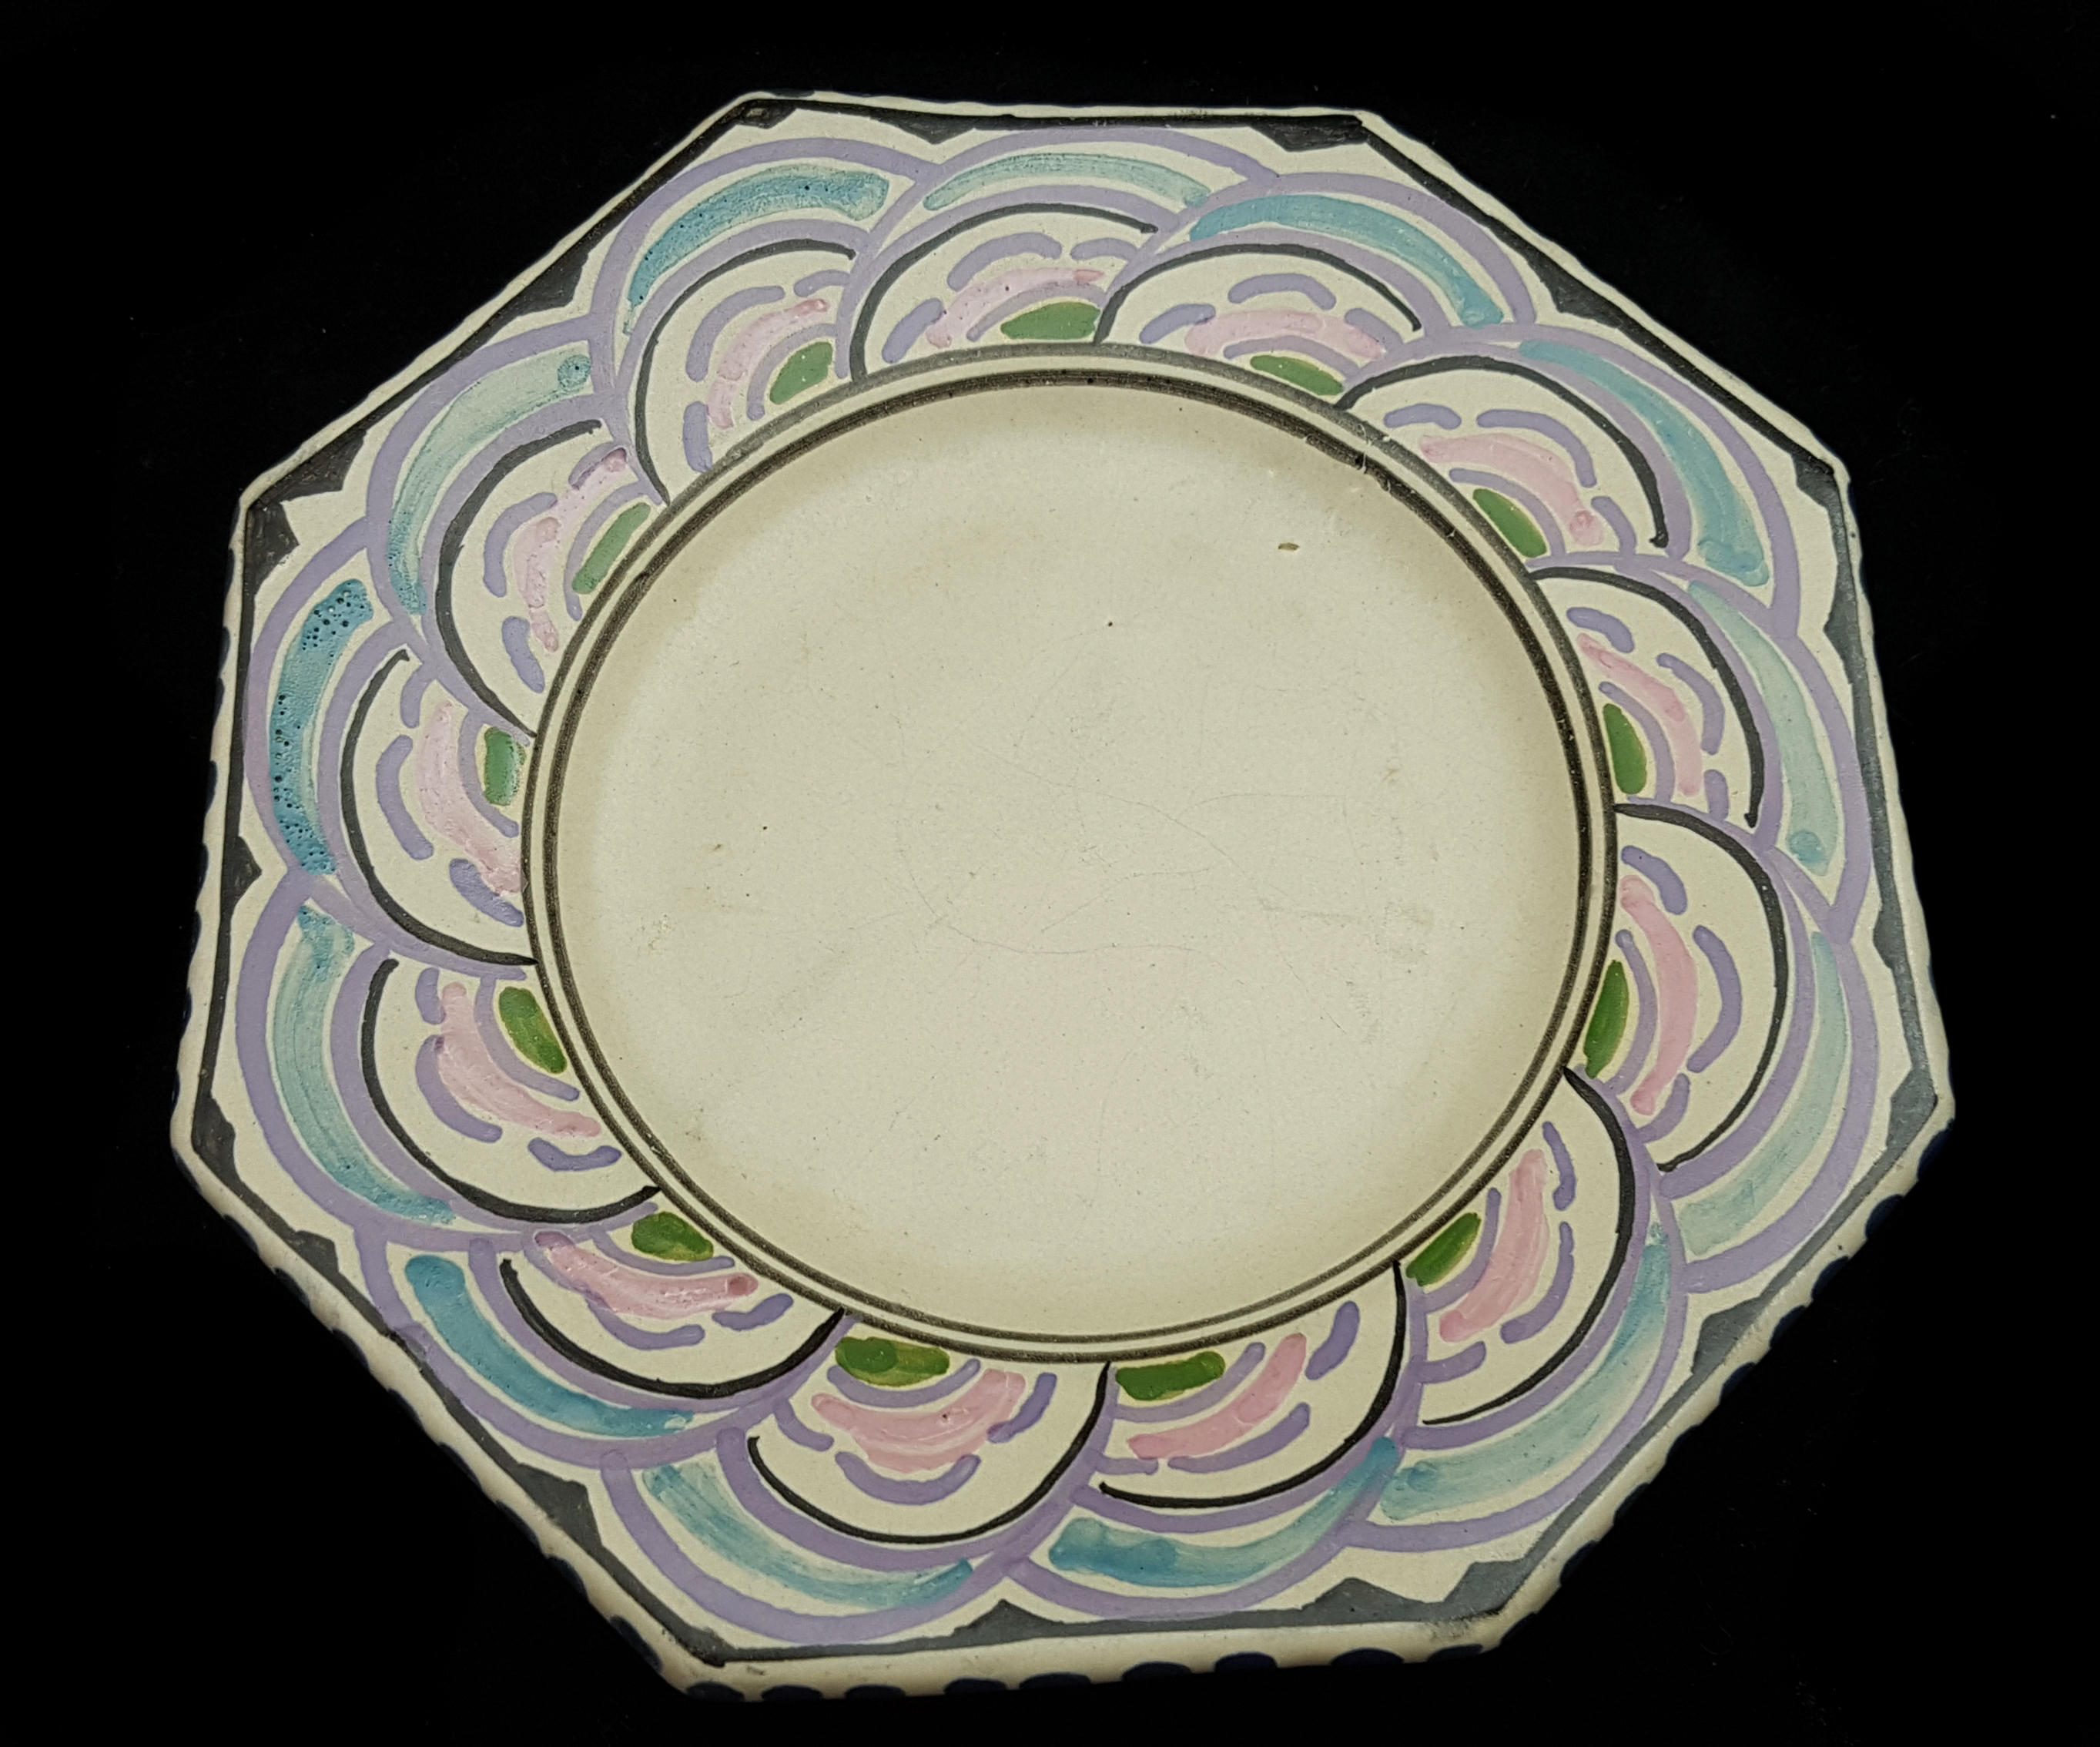 7 items of Honiton Art Deco pottery, each painted with a stylised cloud design in grey blues and - Image 2 of 4